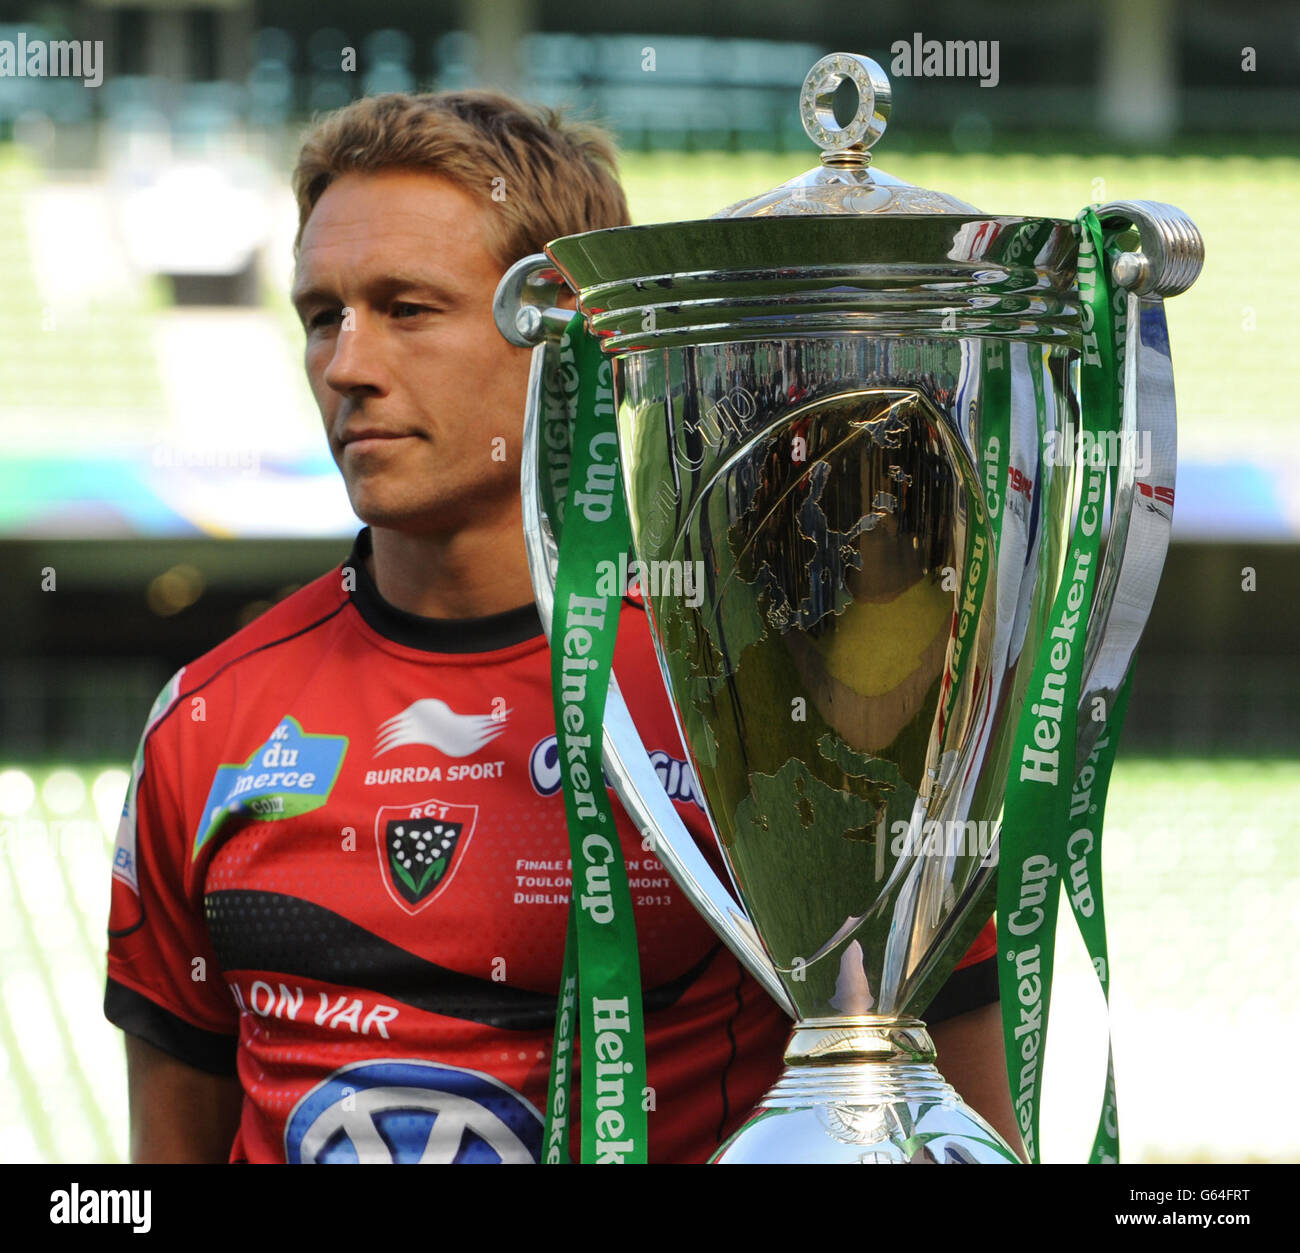 Toulon captain Jonny Wilkinson during the Heineken Cup Final captains run at the Aviva Stadium , Dublin, Ireland. PRESS ASSOCATION Photo. Picture date: Friday May 17, 2013. See PA story RUGBYU Final. Photo credit should read: Artur Widak/PA Wire. Stock Photo